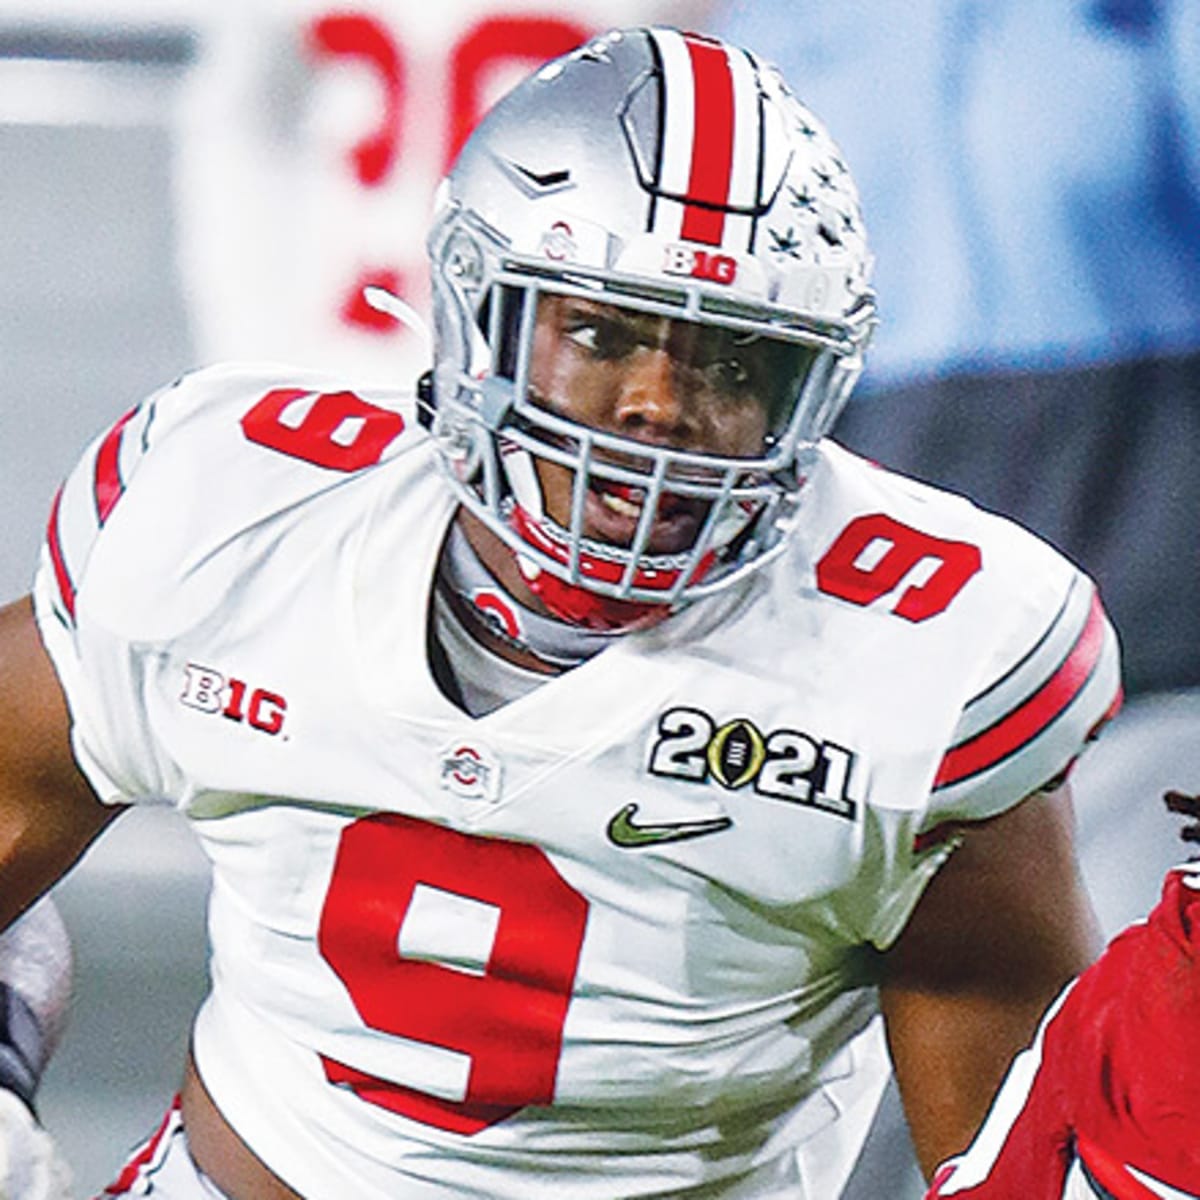 Ohio State Football 2021 Buckeyes Season Preview And Prediction Athlonsports Com Expert Predictions Picks And Previews